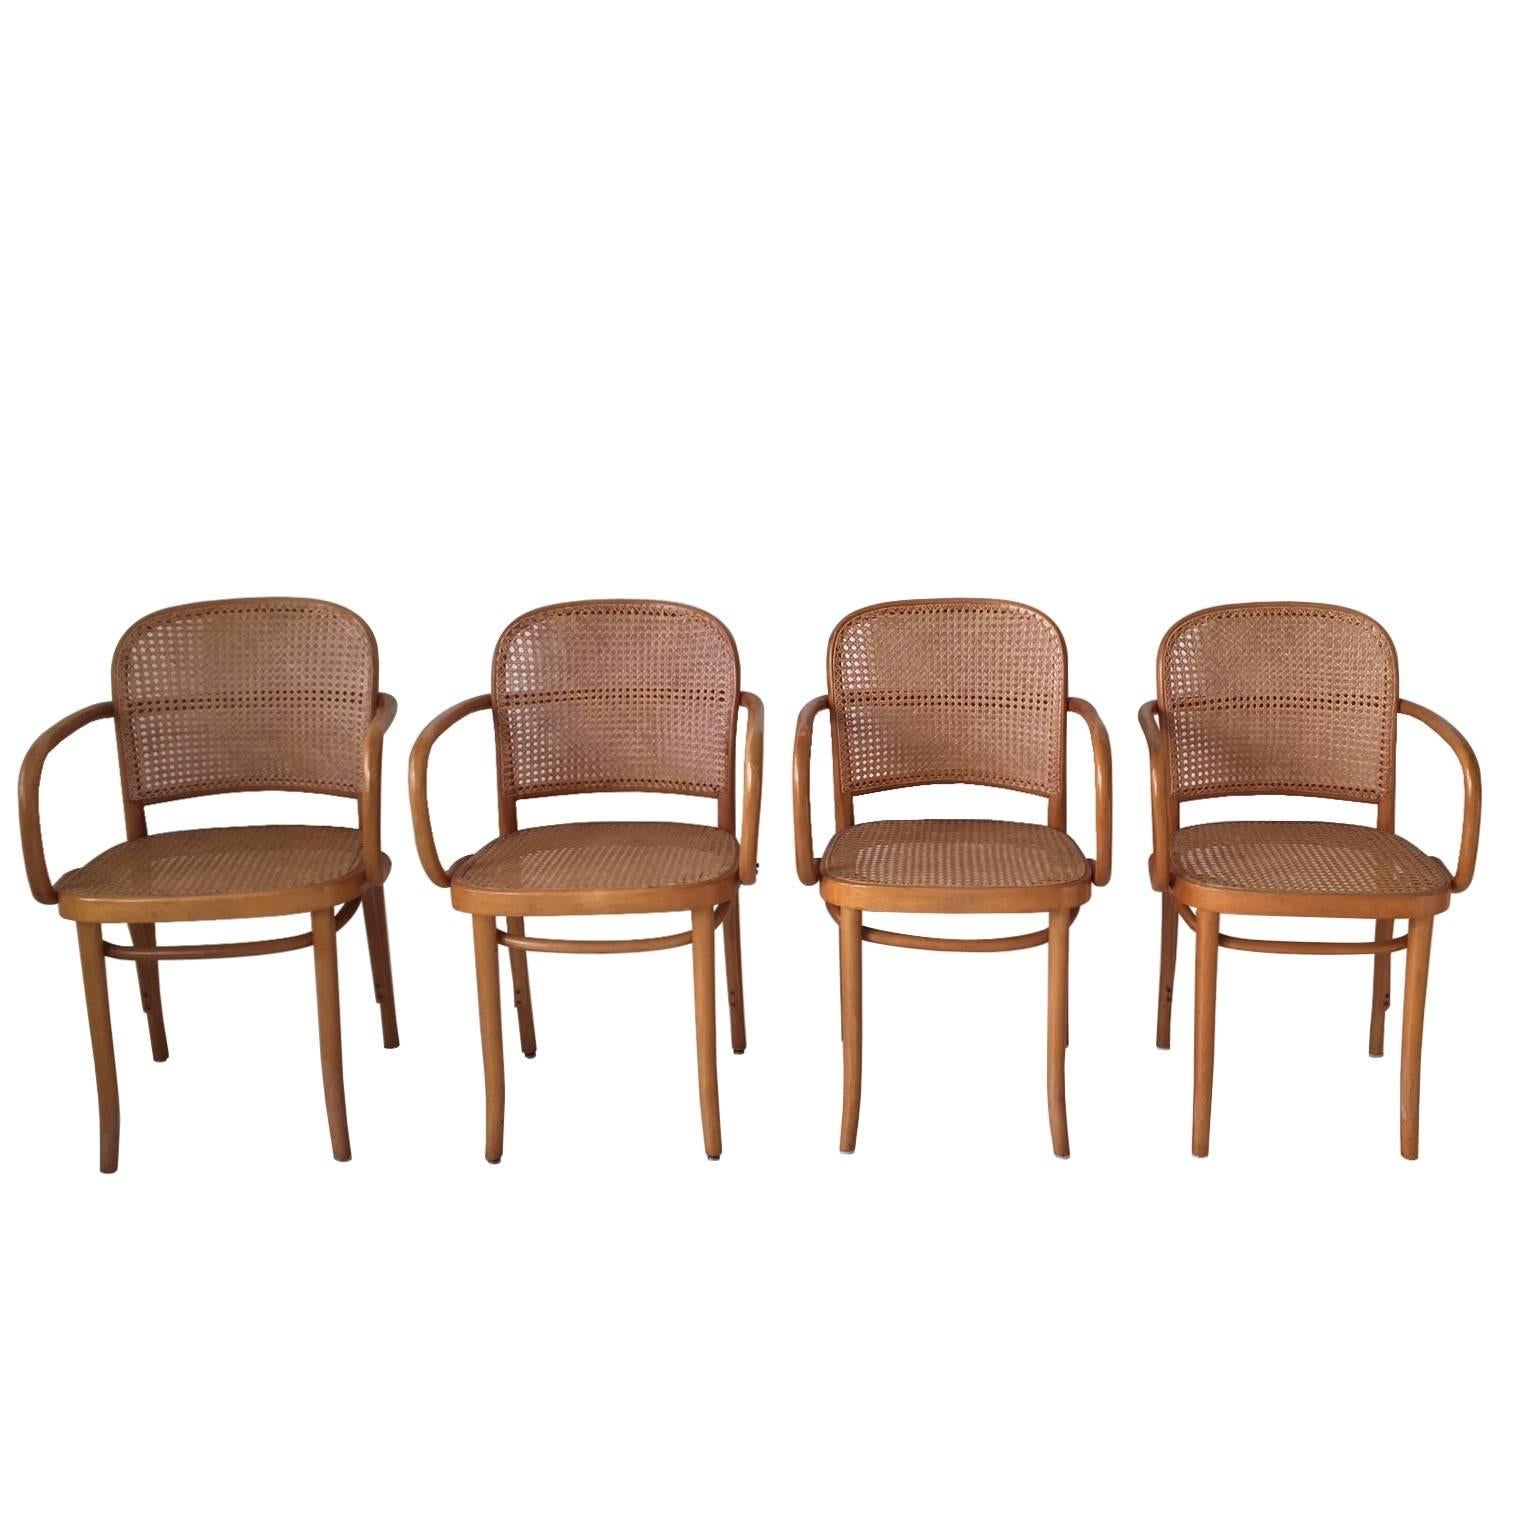 Josef Hoffmann, Bentwood and Cane No. 811 Chairs, Set of Four, 1960s